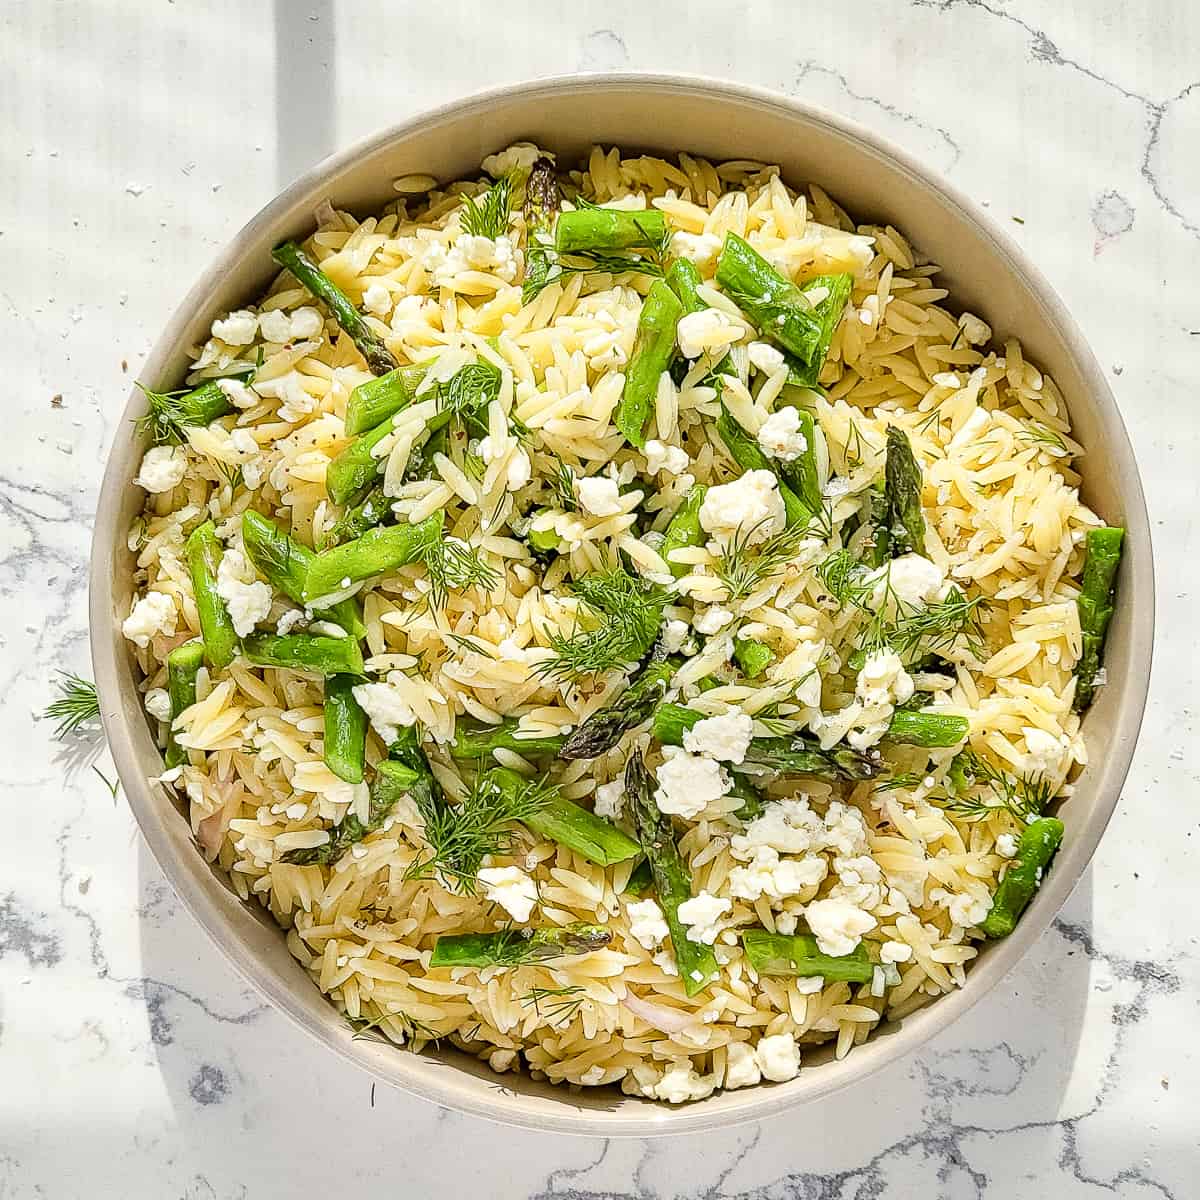 A bowl of chilled orzo pasta salad with asparagus.